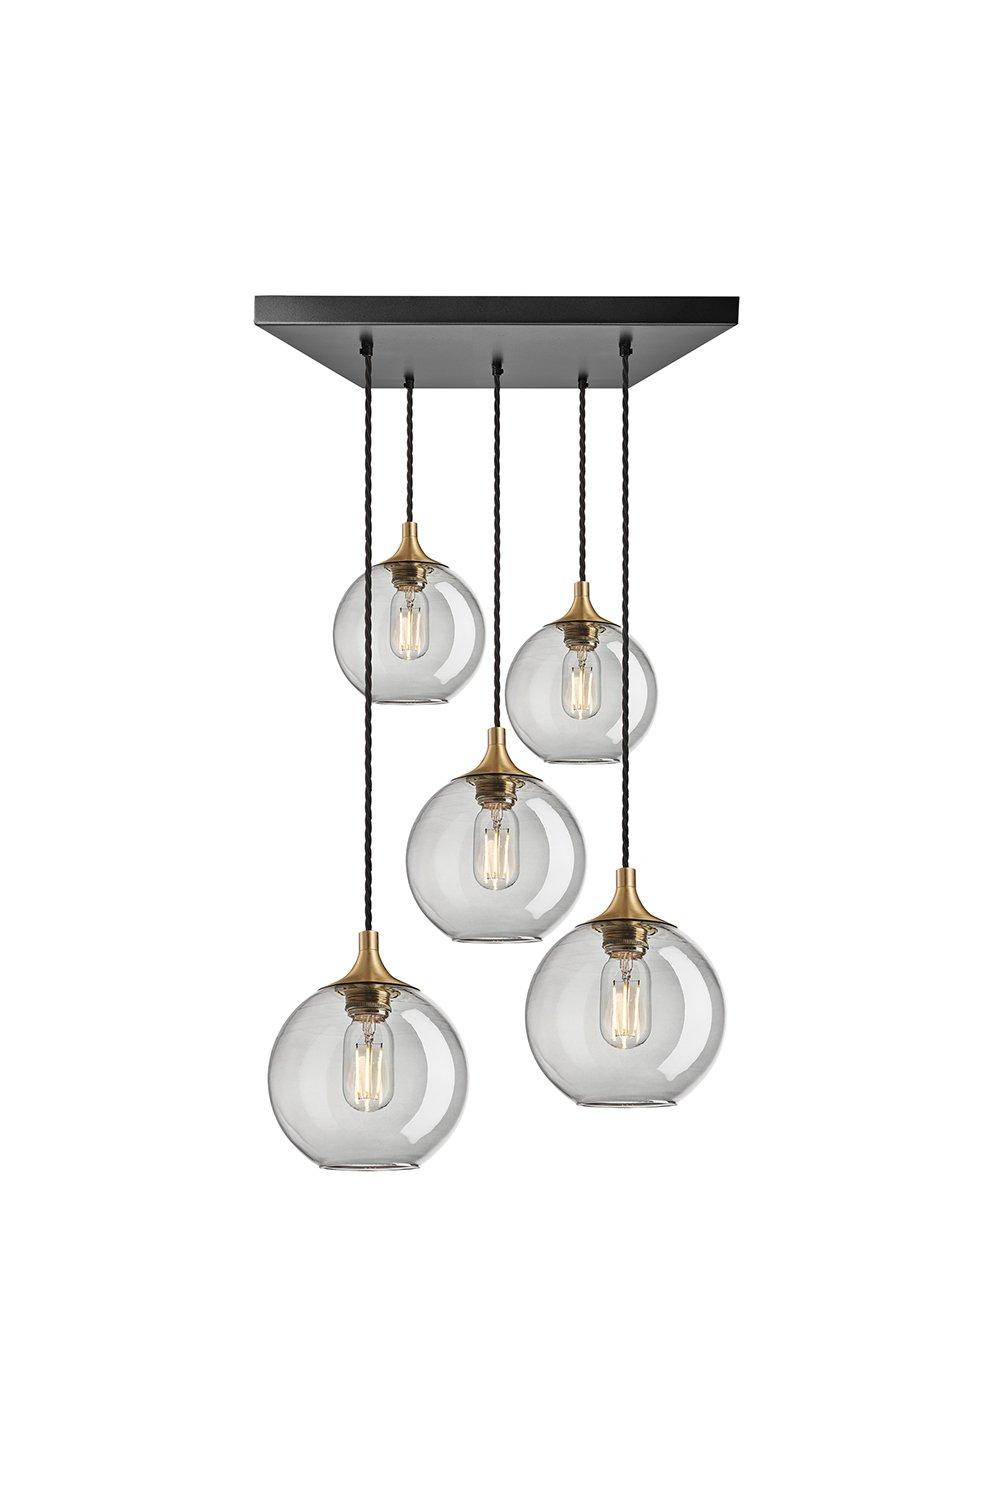 Chelsea Tinted Glass Globe 5 Wire Square Cluster Lights, 7 inch, Smoke Grey, Brass holder